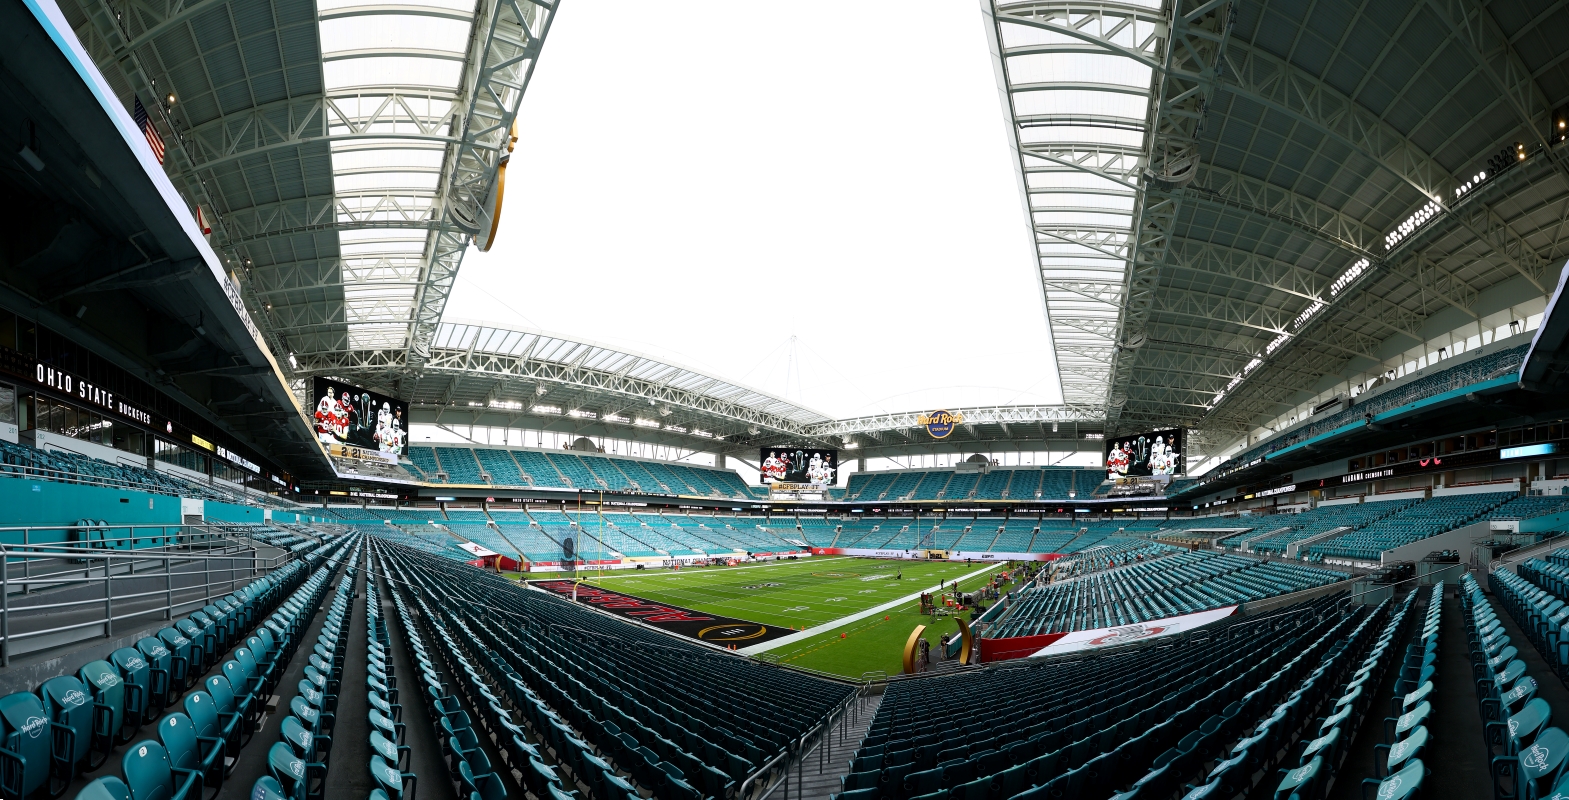 Hard Rock Stadium in Miami hosted the 2021 College Football Playoff National Championship Game between the Alabama Crimson Tide and the Ohio State Buckeyes. An alliance between the Pac-12, Big Ten, and ACC is official as the three conferences try to keep up with the SEC's growing power.